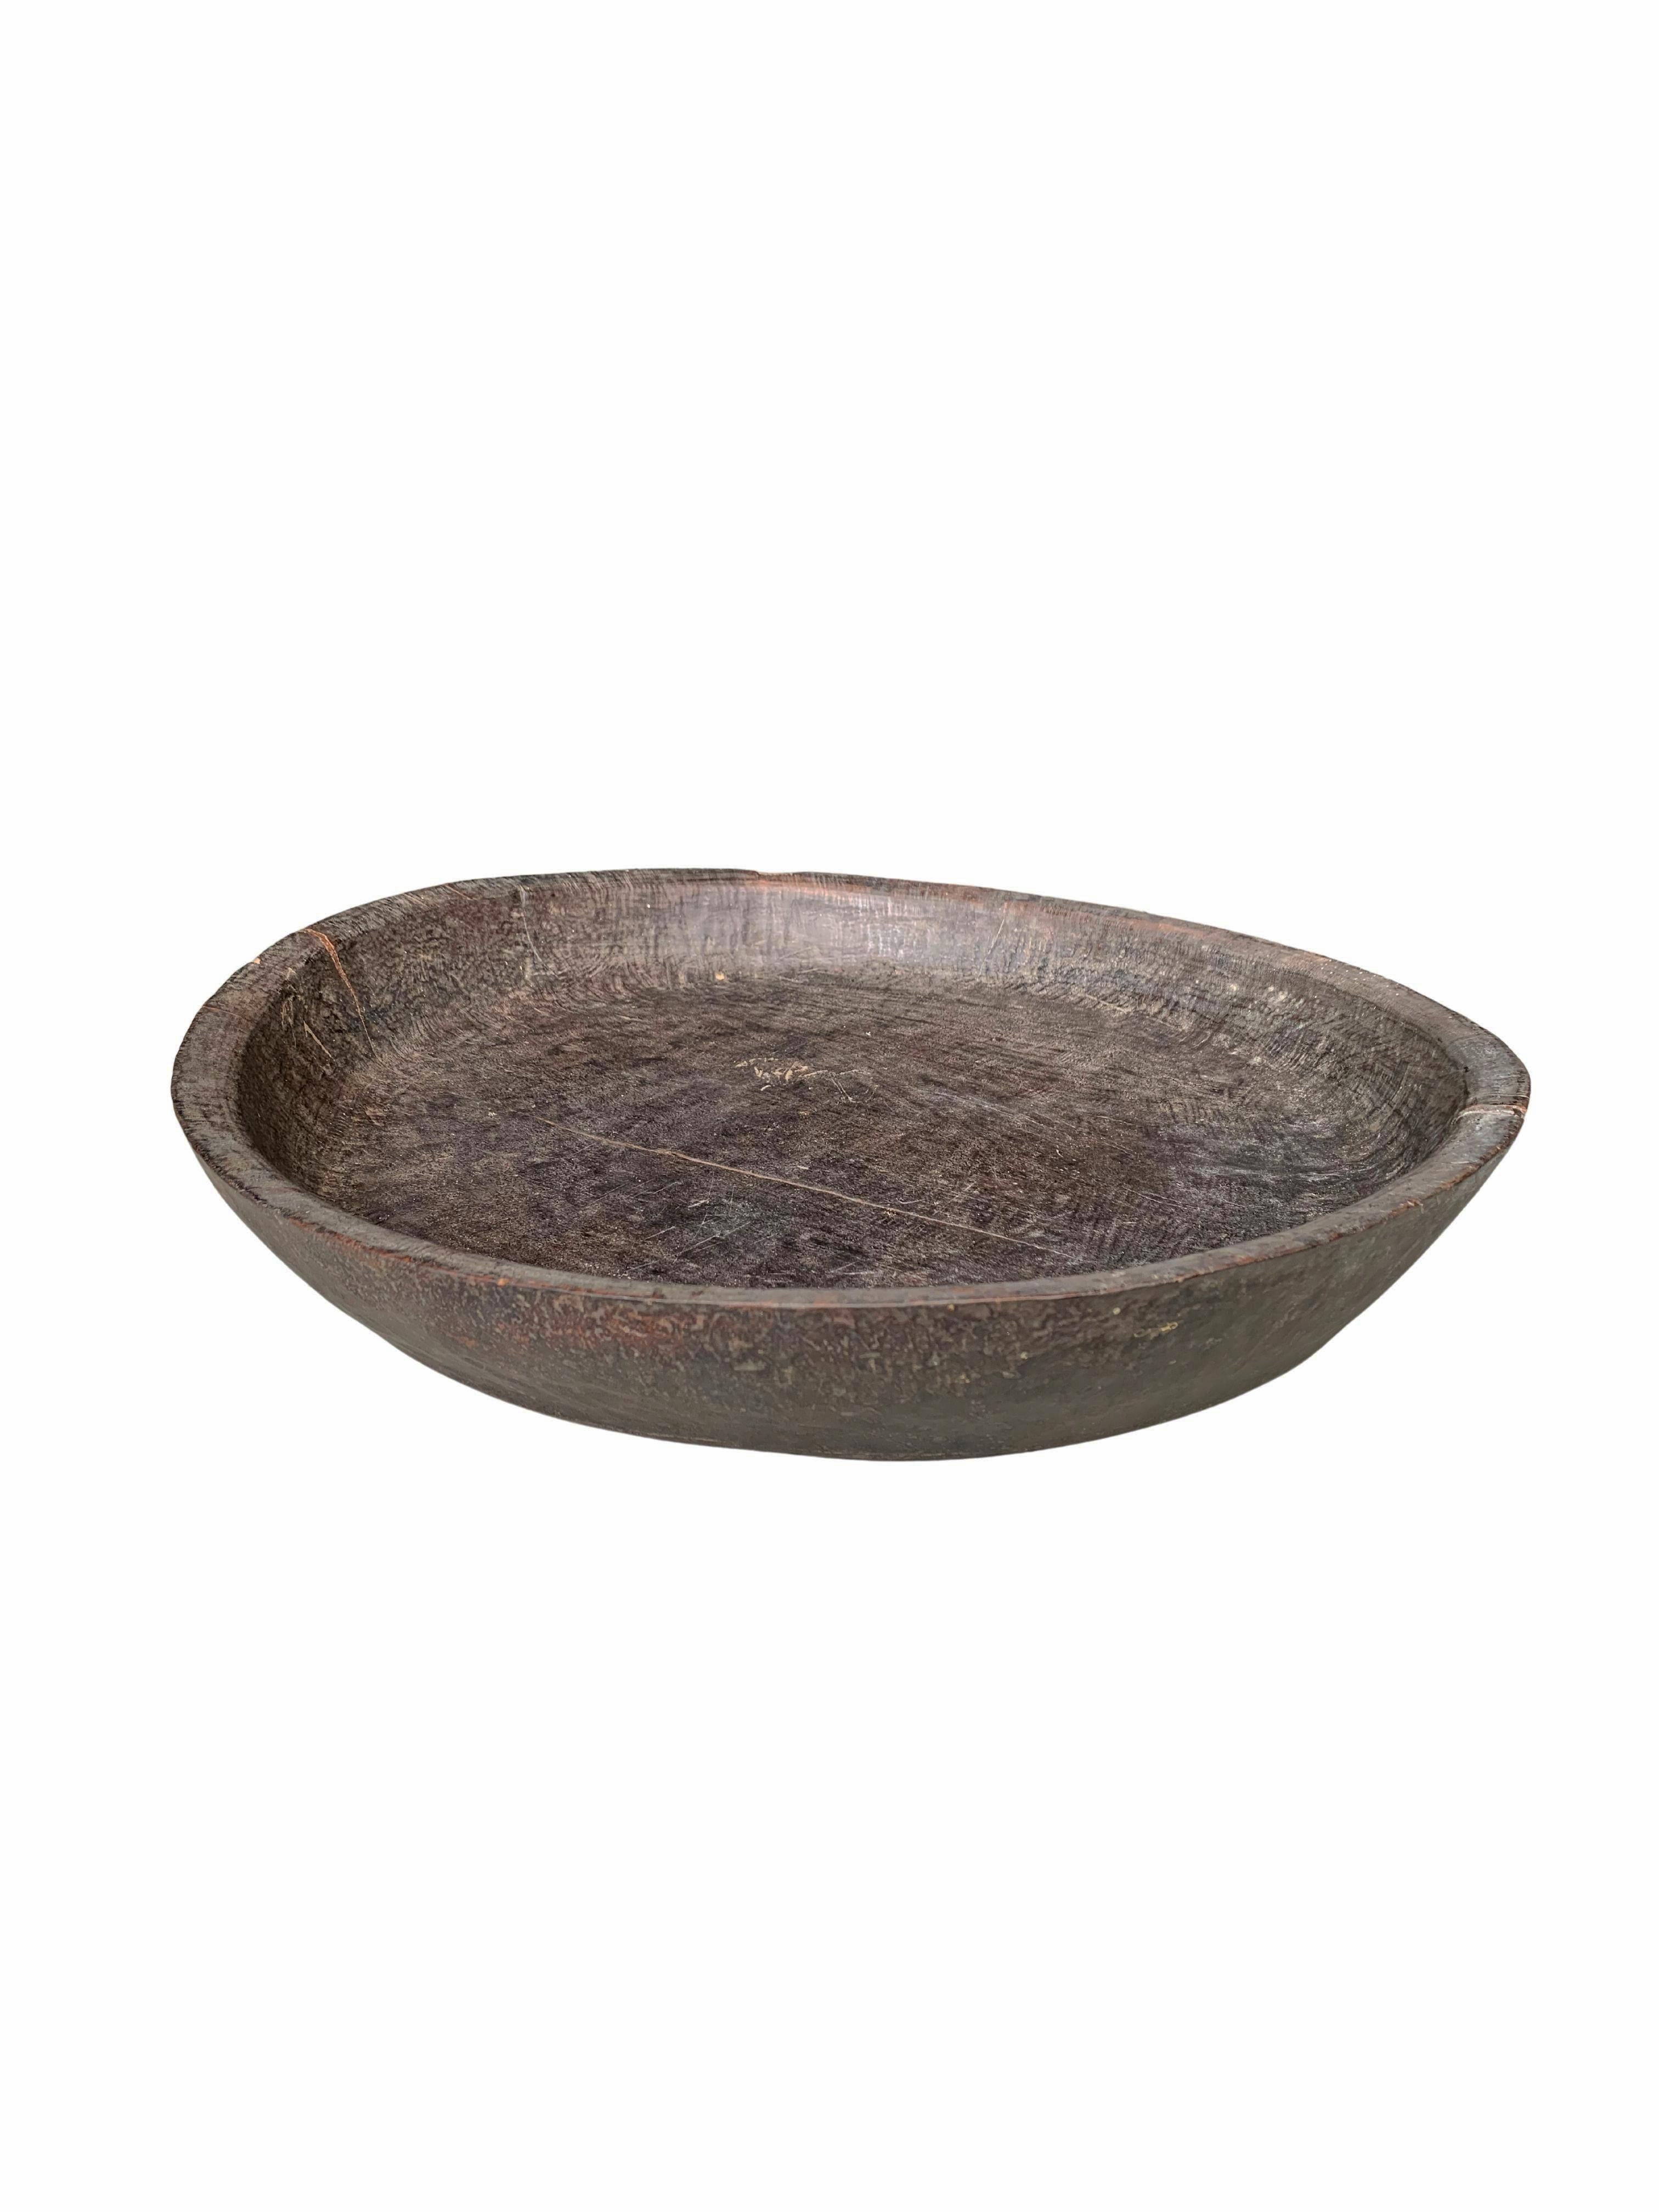 Indonesian Dayak Tribe Ironwood Bowl, Early 20th Century For Sale